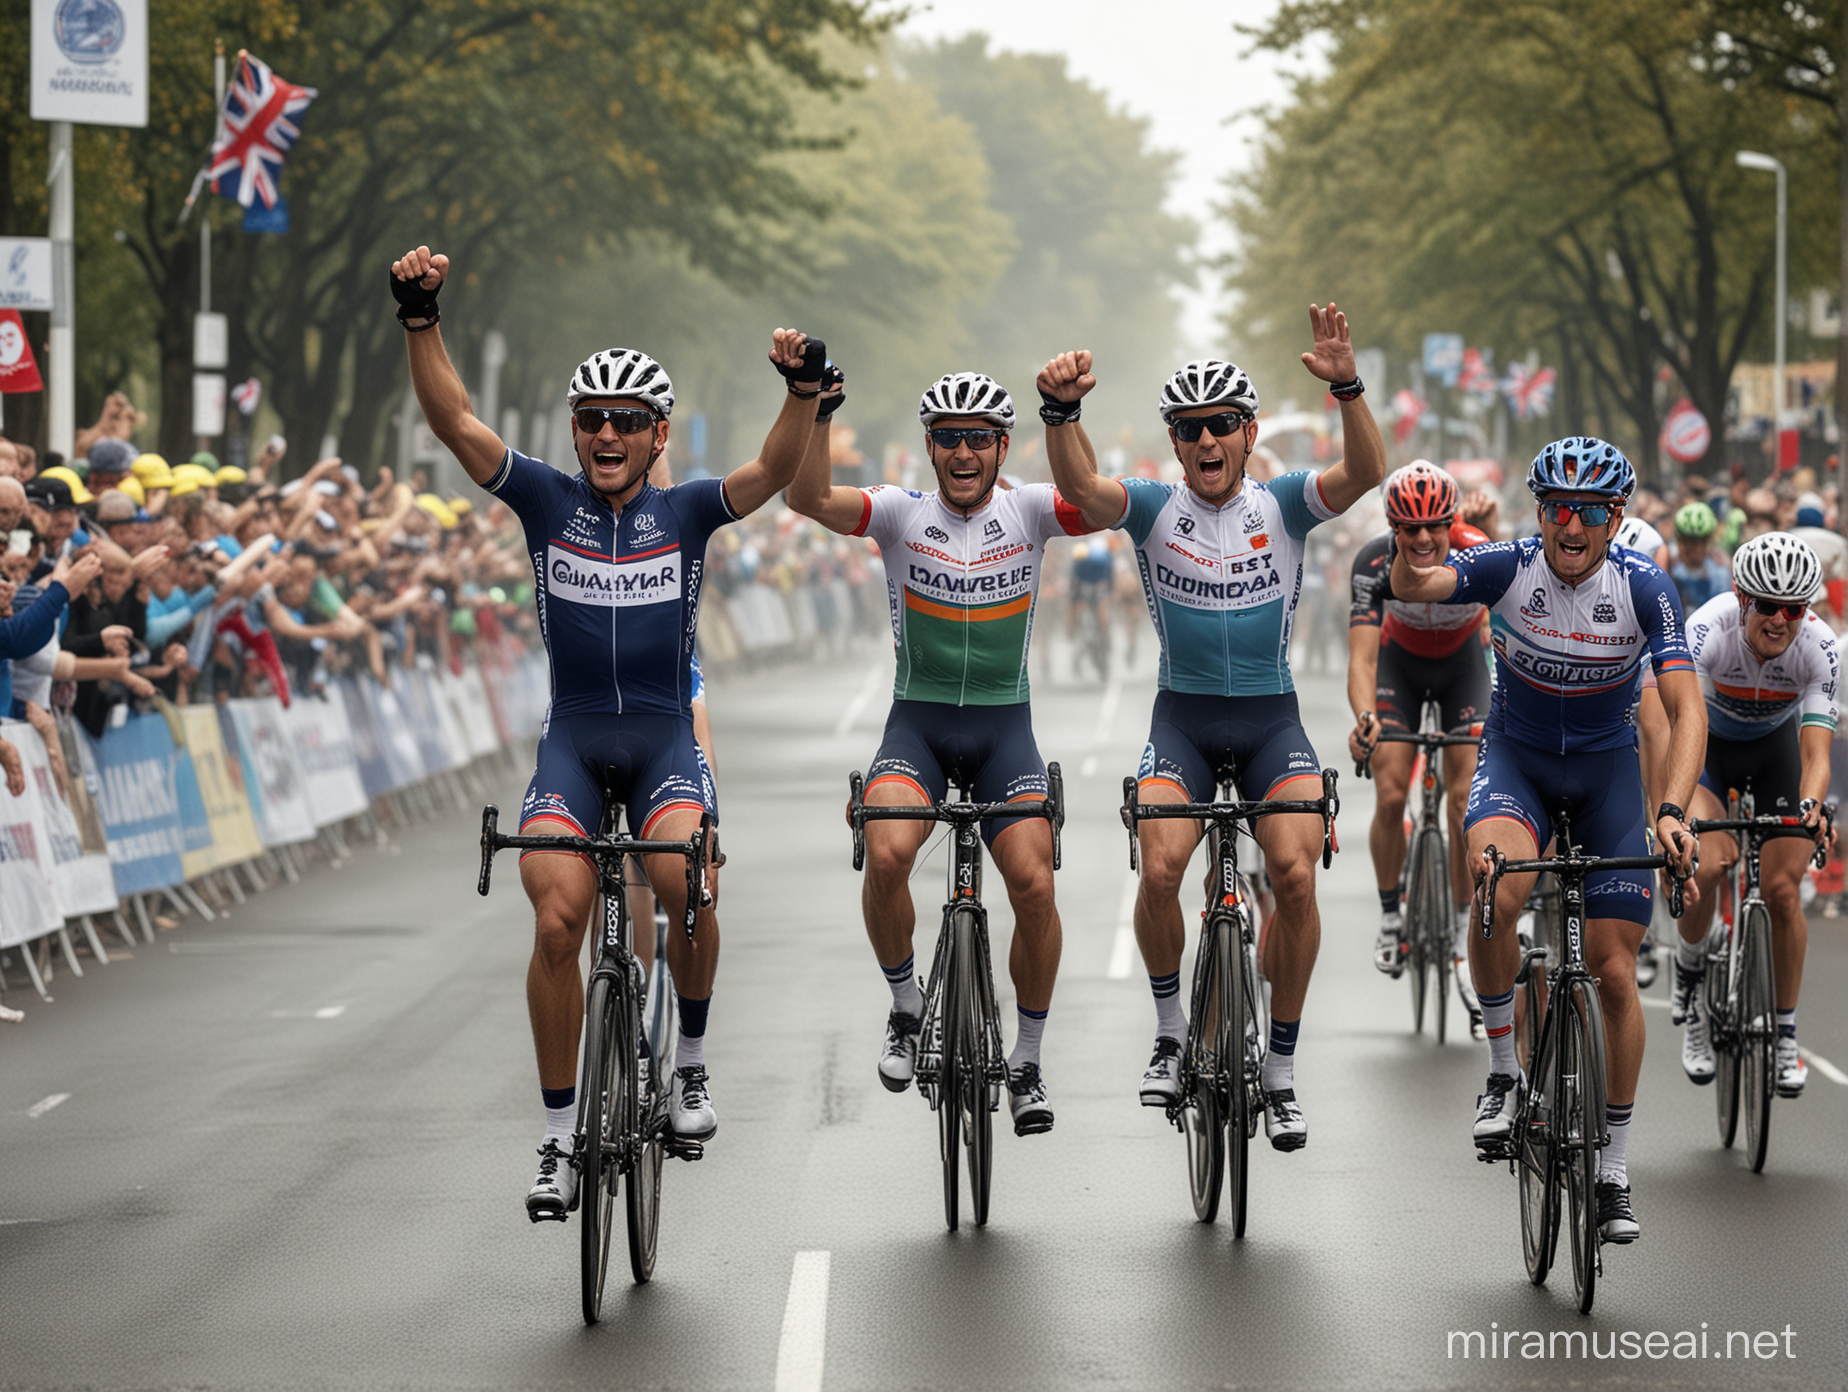 Championship Winning Cycle Team Celebrating with HighFives